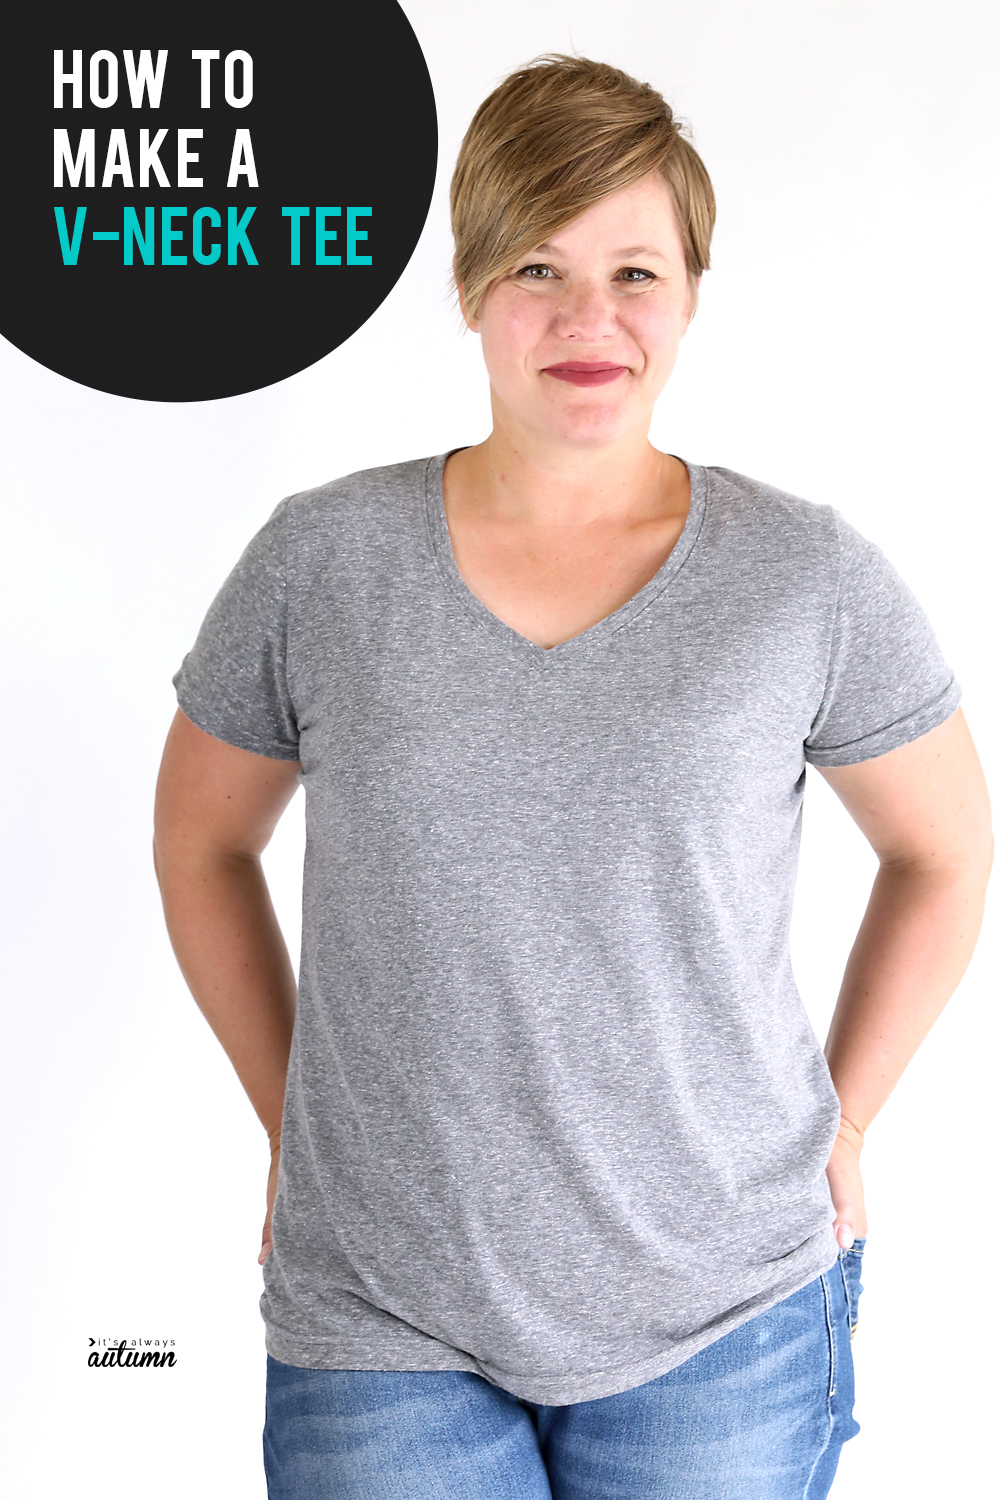 How to make a vneck tshirt {sewing pattern and tutorial